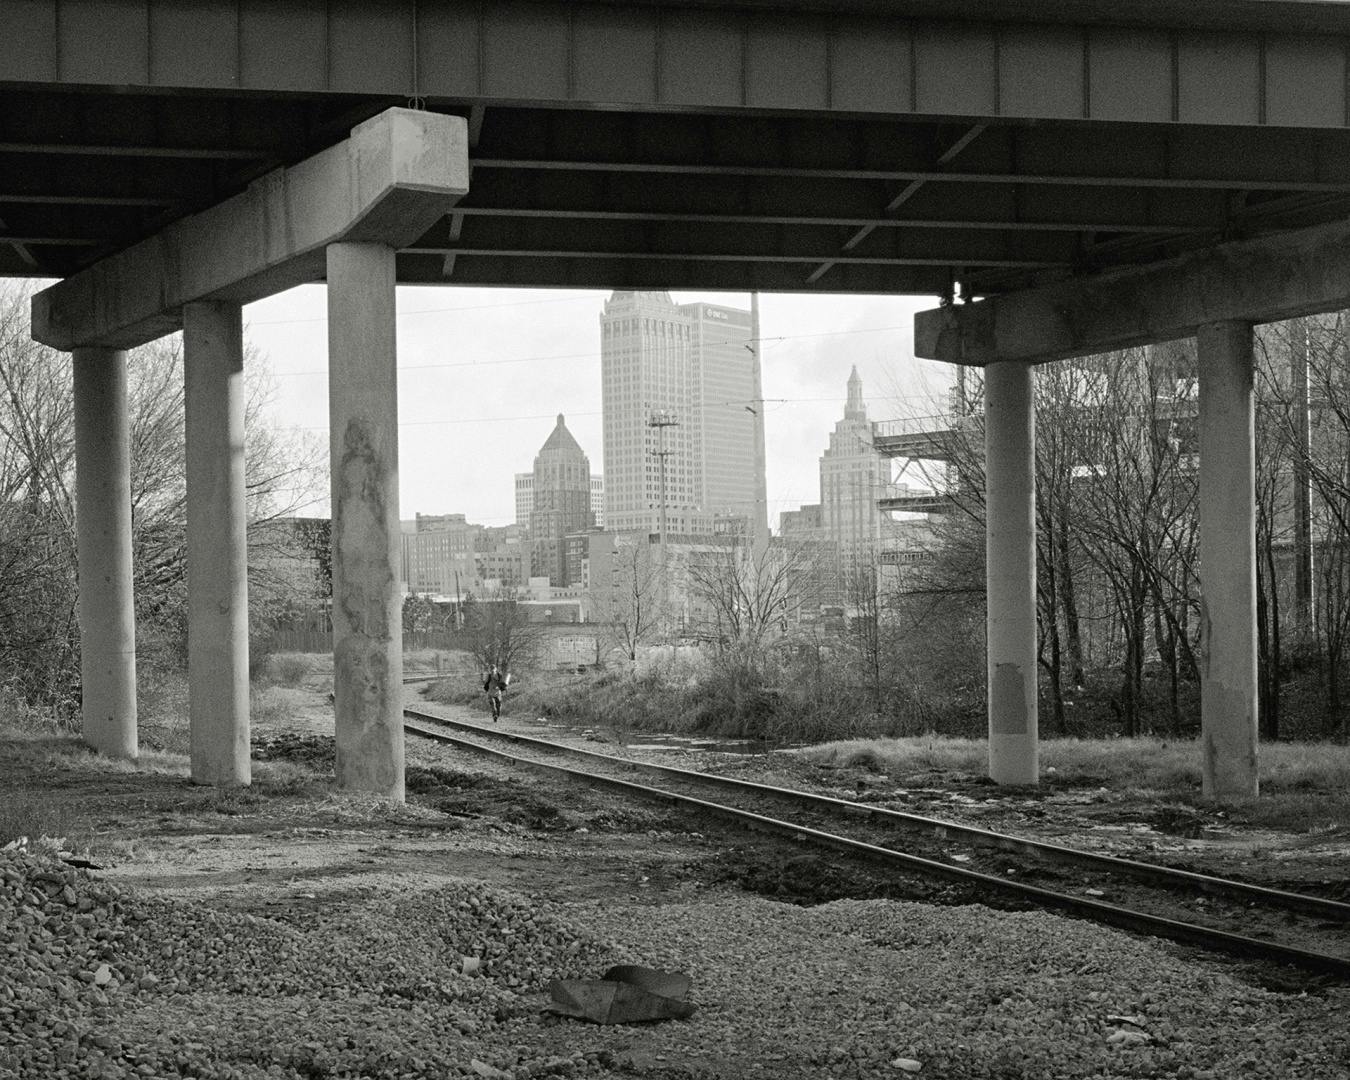 Black and white photograph from Hardtack by Rahim Fortune showing three tall buildings in a city skyline in the background, viewed through a bridge with a trainline running underneath